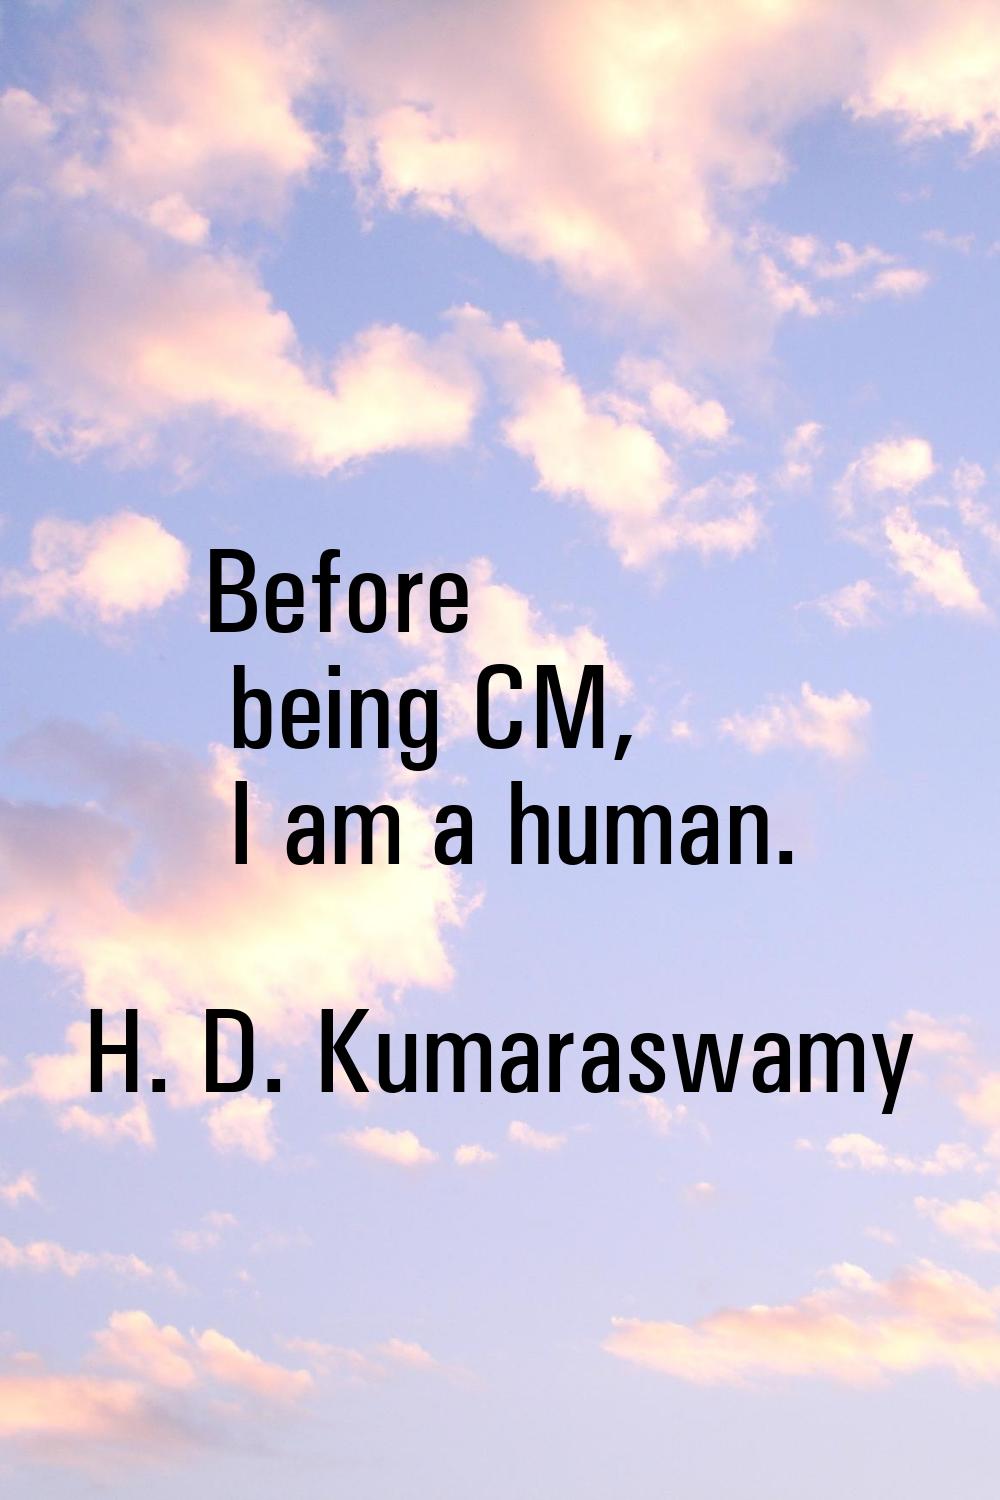 Before being CM, I am a human.